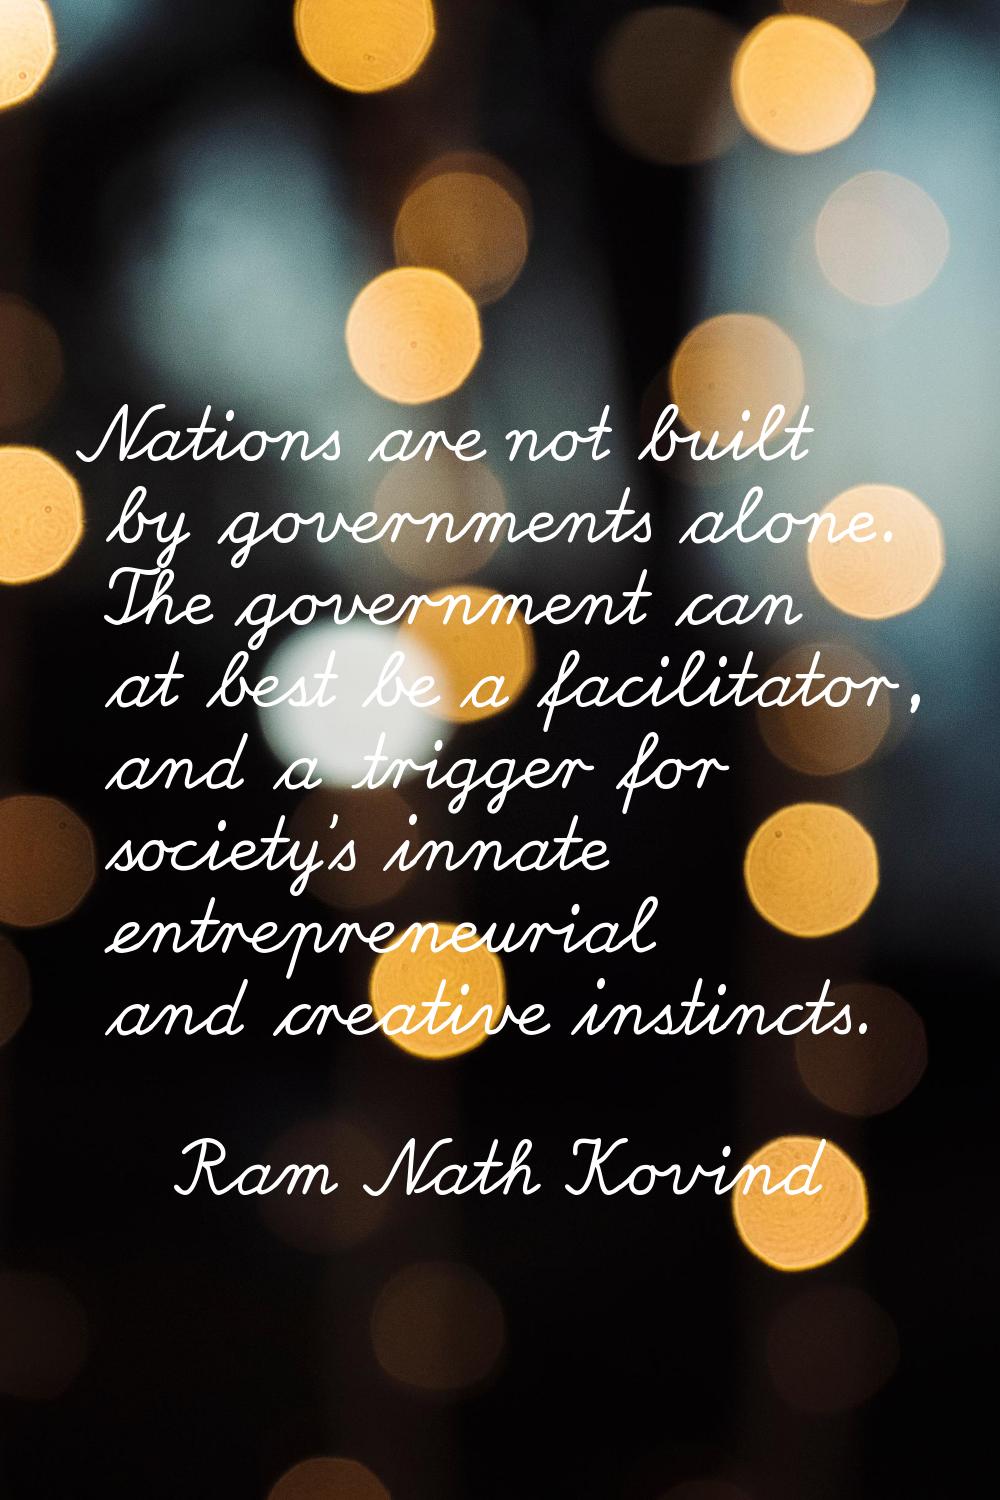 Nations are not built by governments alone. The government can at best be a facilitator, and a trig